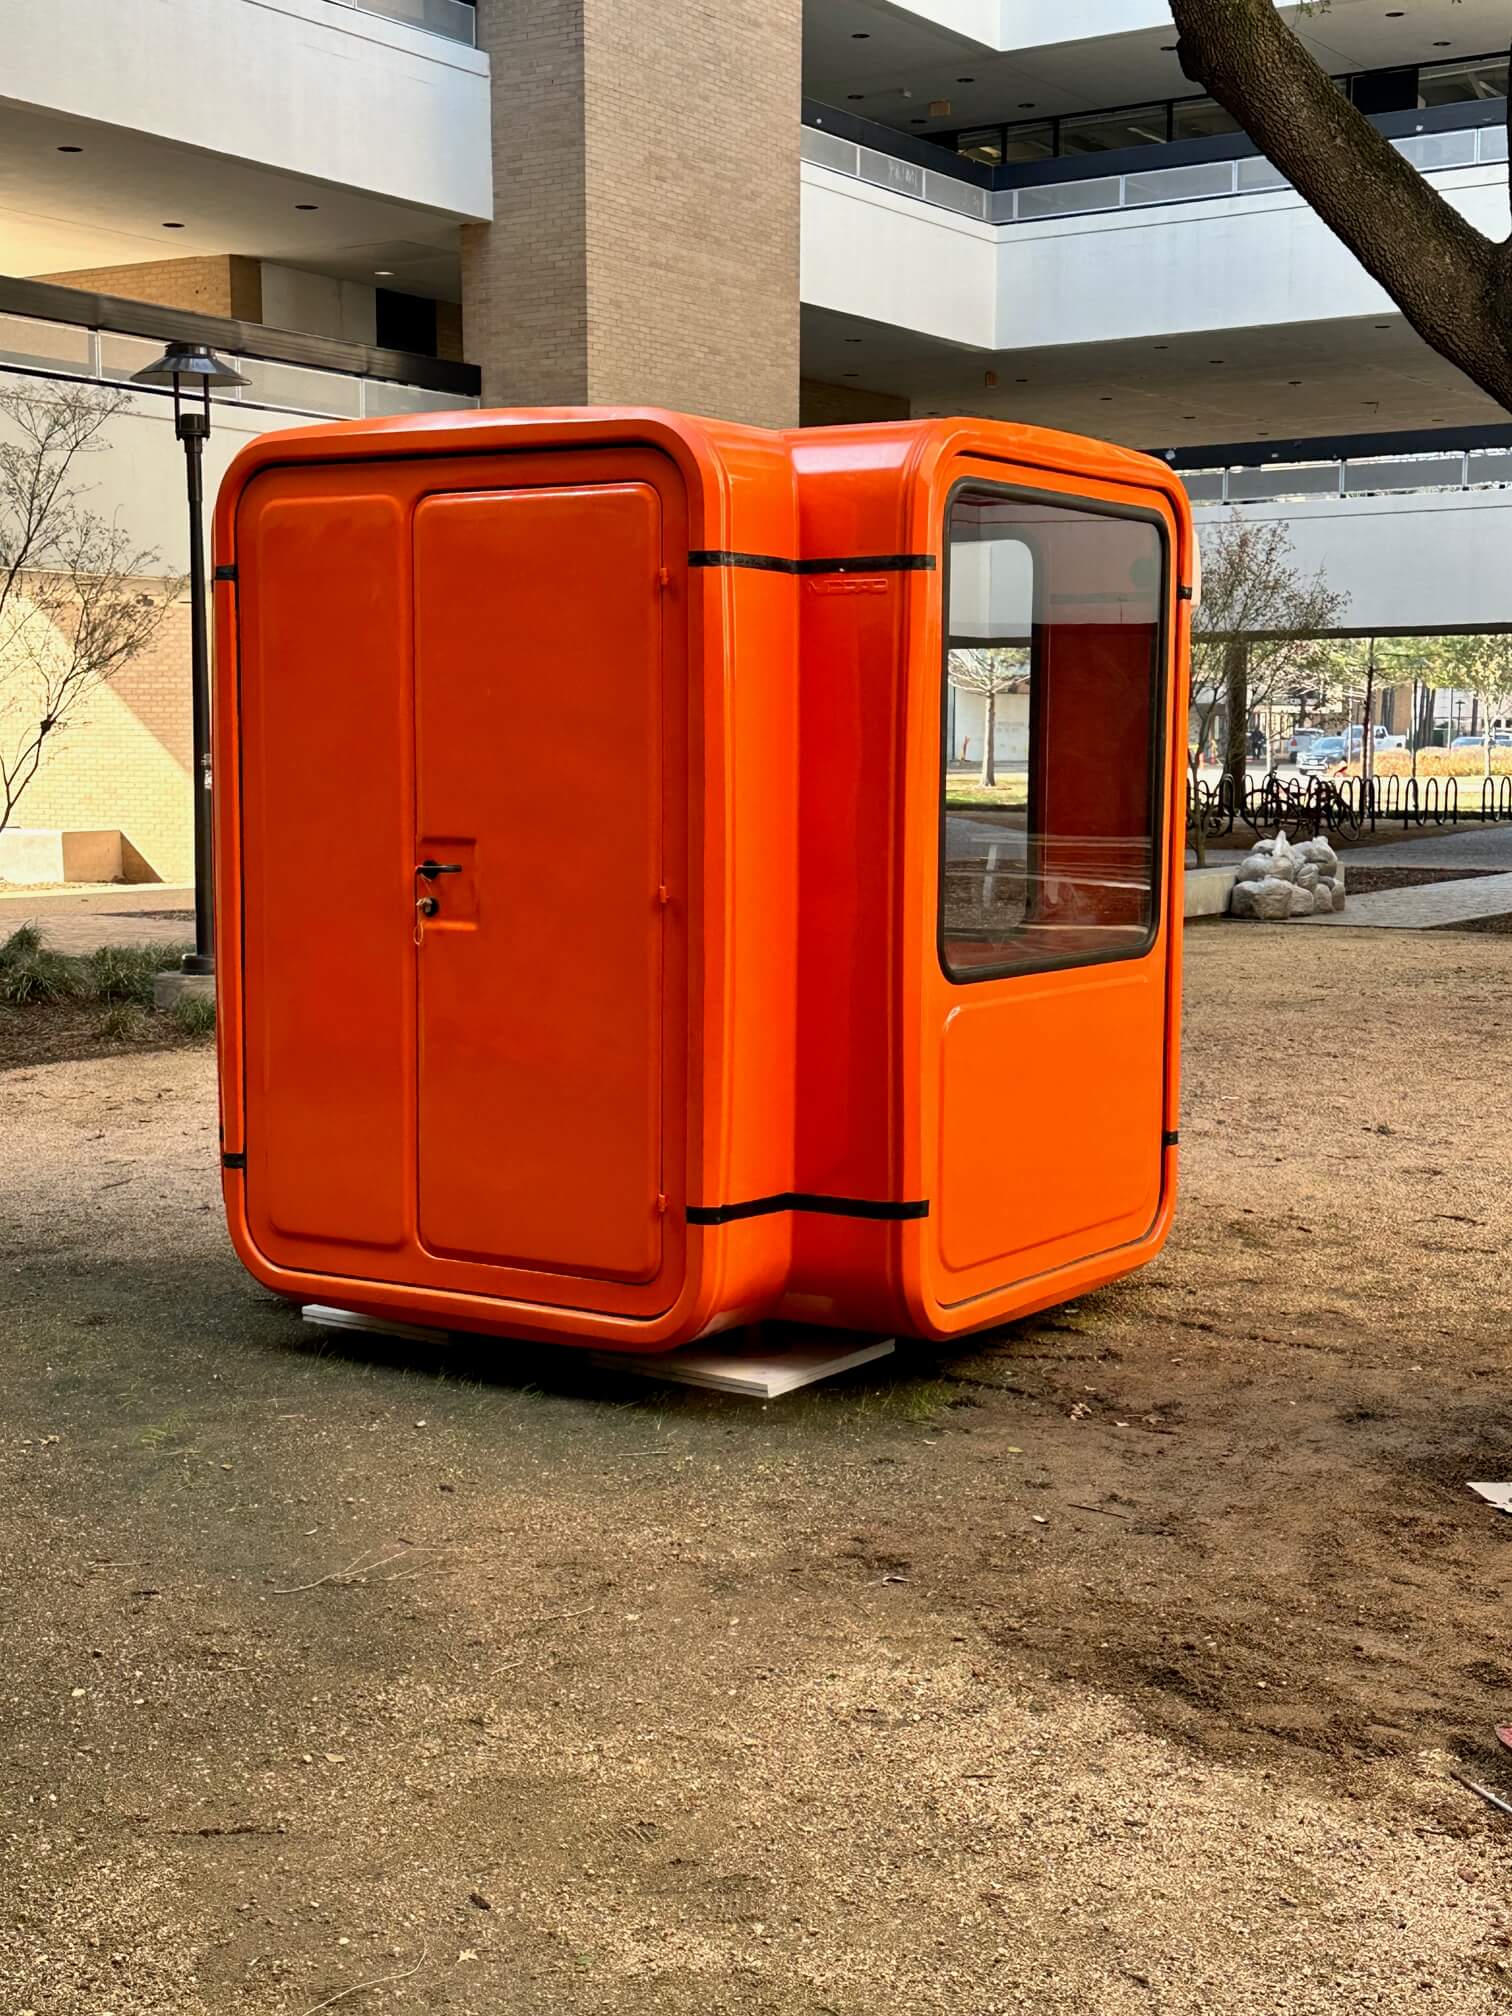 red kiosk sits in dirt lot